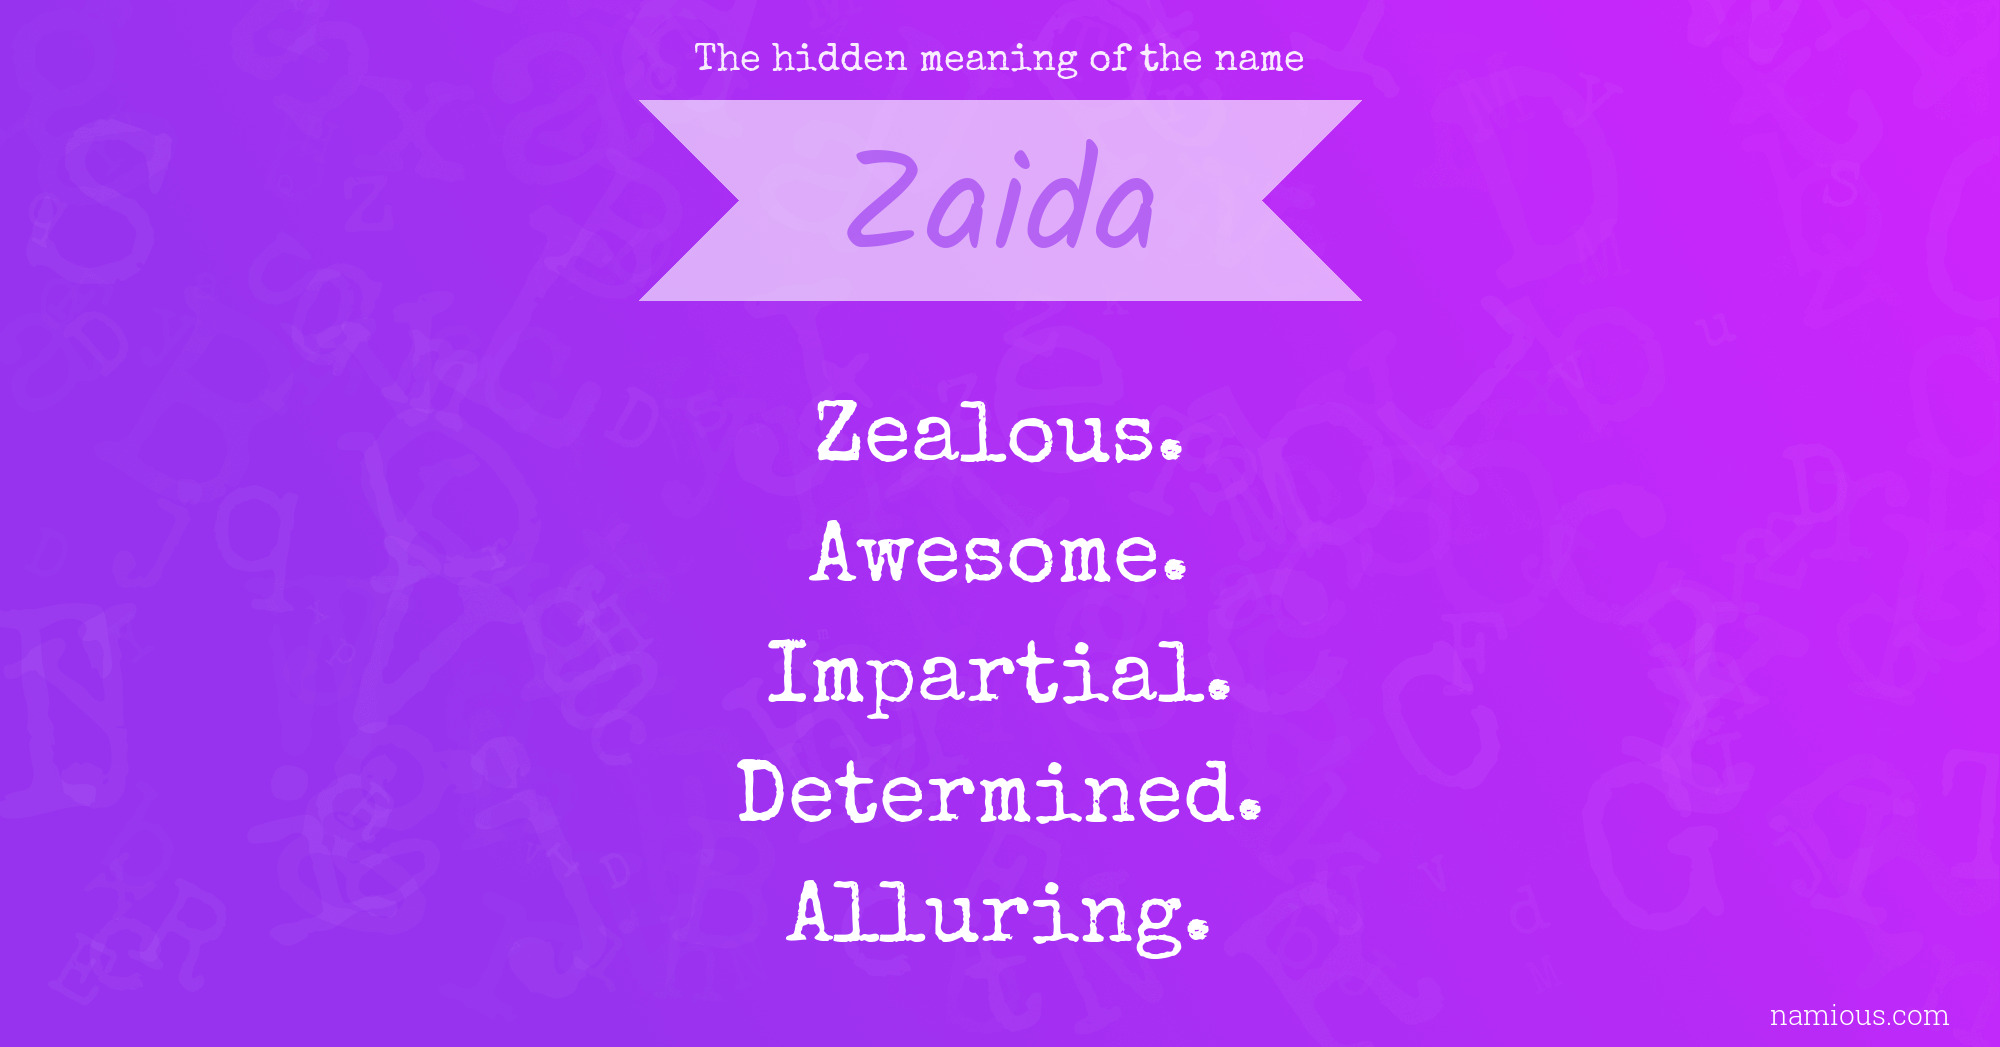 The hidden meaning of the name Zaida